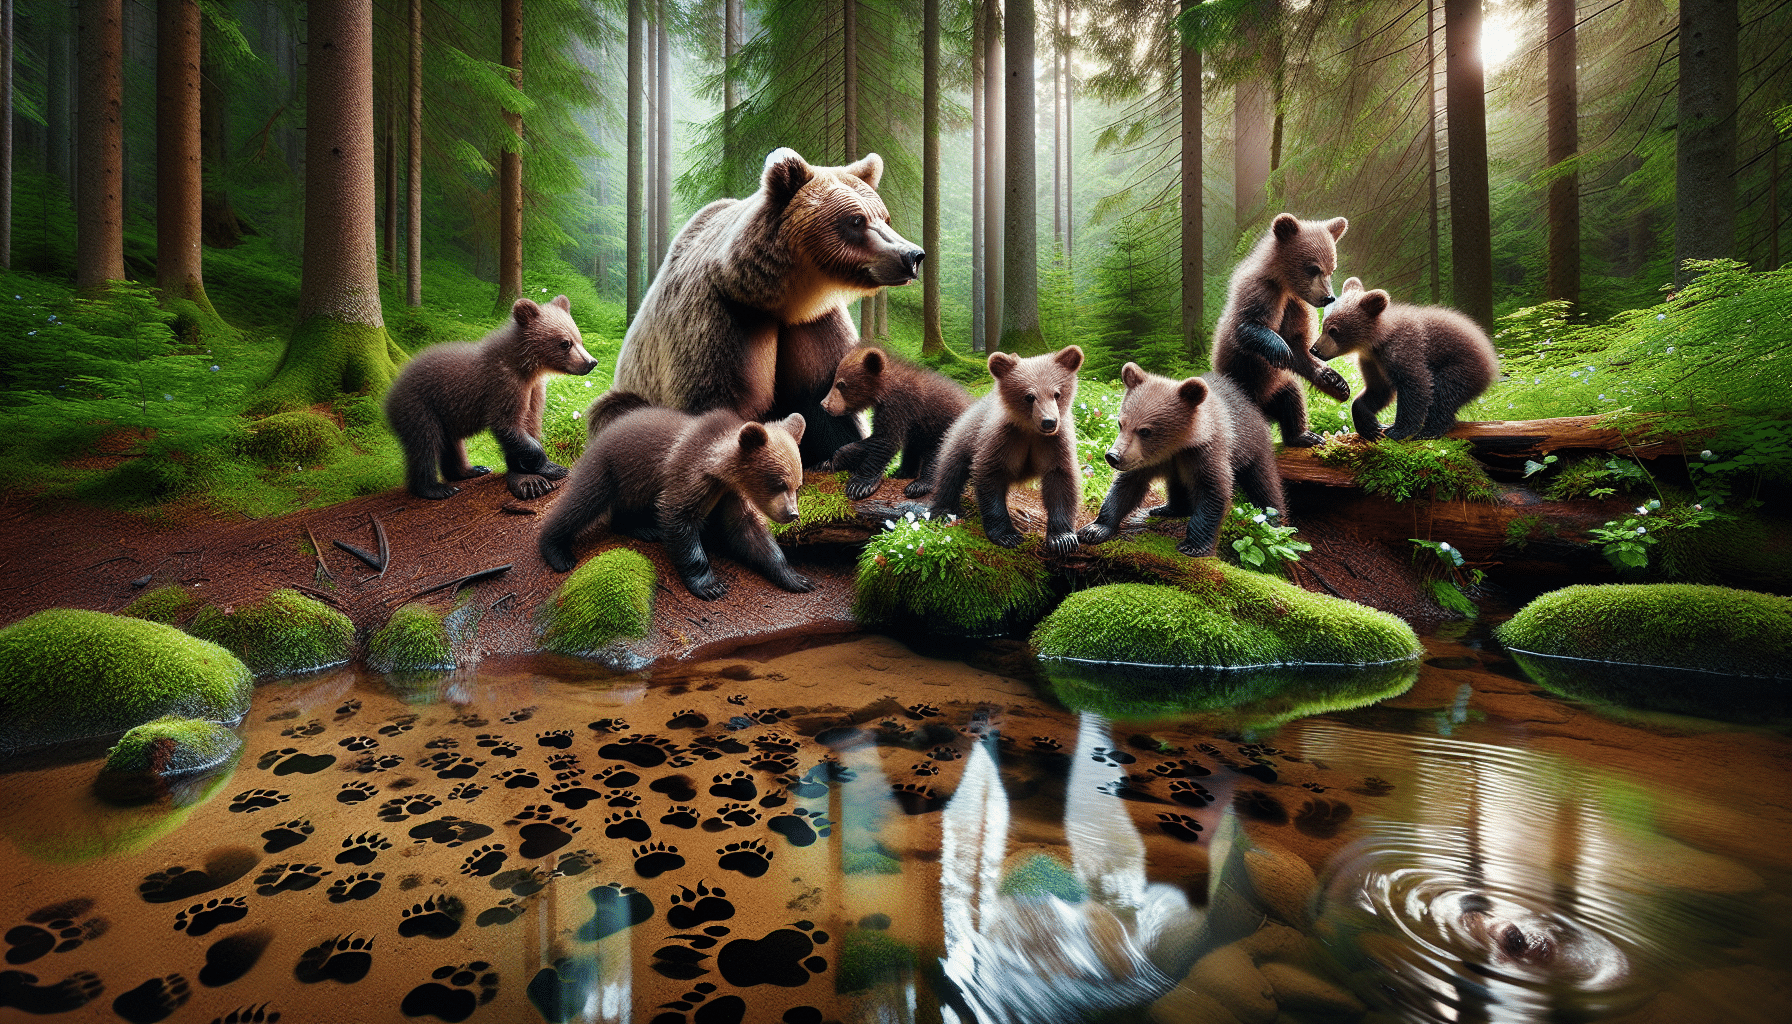 A tranquil forest scene showcasing a proud brown bear mother with a variety of numbers of cubs interacting around her. For instance, some cubs are play-fighting, while others are climbing trees or sniffing at flowers. A clear stream runs through the forest, reflecting the bear family in its calm flow. Scattered paw prints of different sizes can be seen in the damp soil beside the stream, giving a hint of the lively bear family activities. The image is void of human presence, text, brands, and logos.